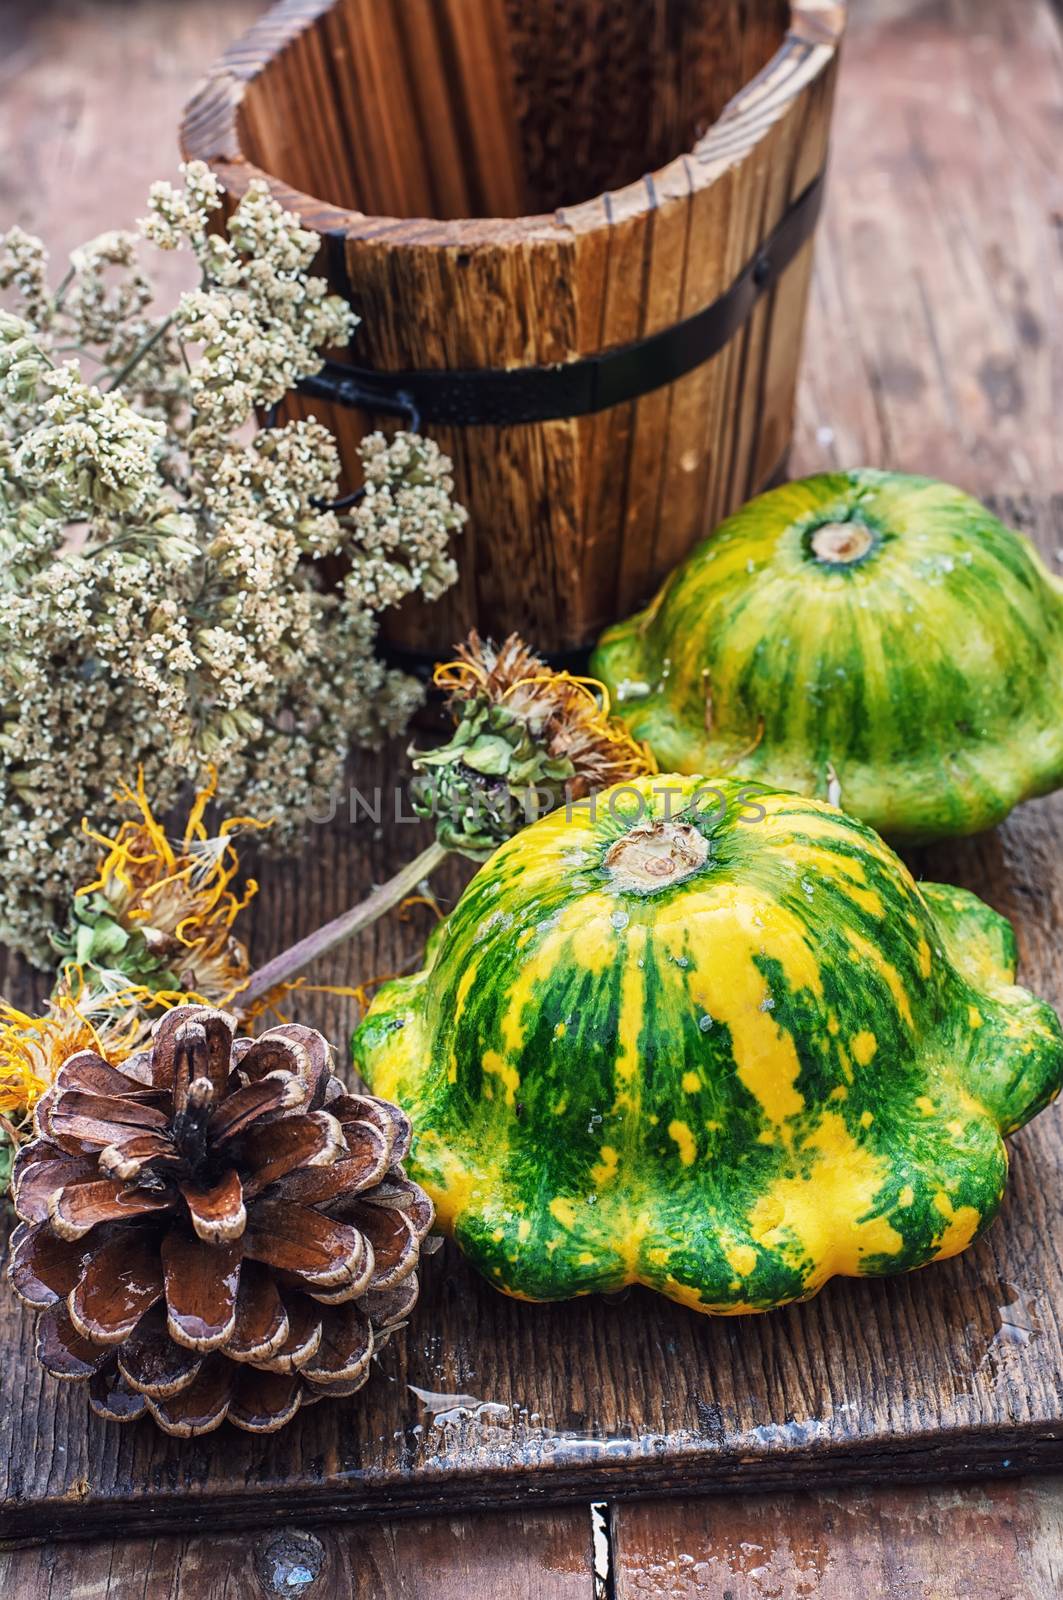 harvest squash on the background of the autumn of attributes in rustic style